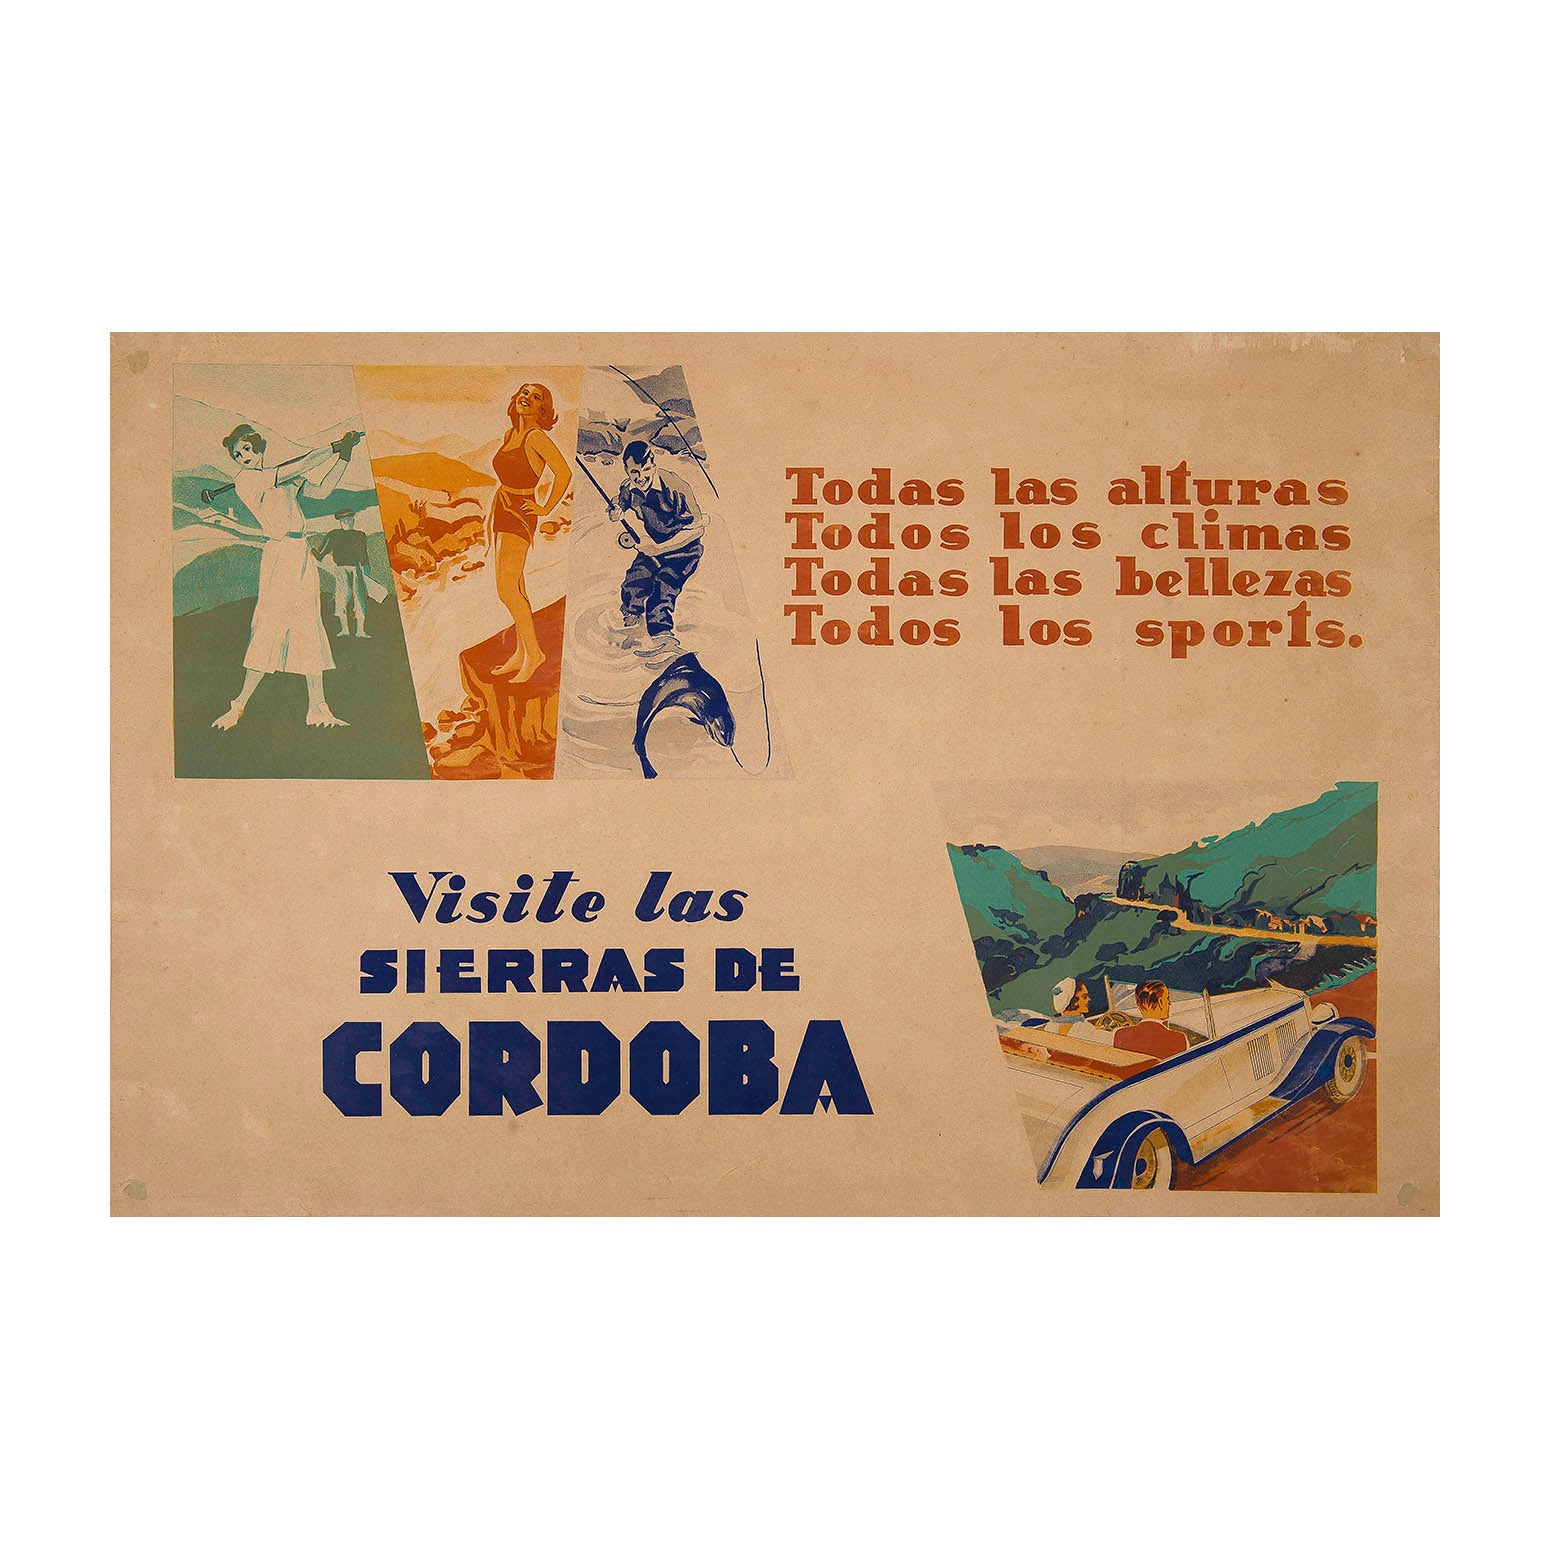 1930s travel poster advertising holidays to the Sierras de Córdoba mountain range in central Argentina. The design depicts a fashionable young couple in an open top touring car (bottom right) with images of golf, swimming, and fishing above.